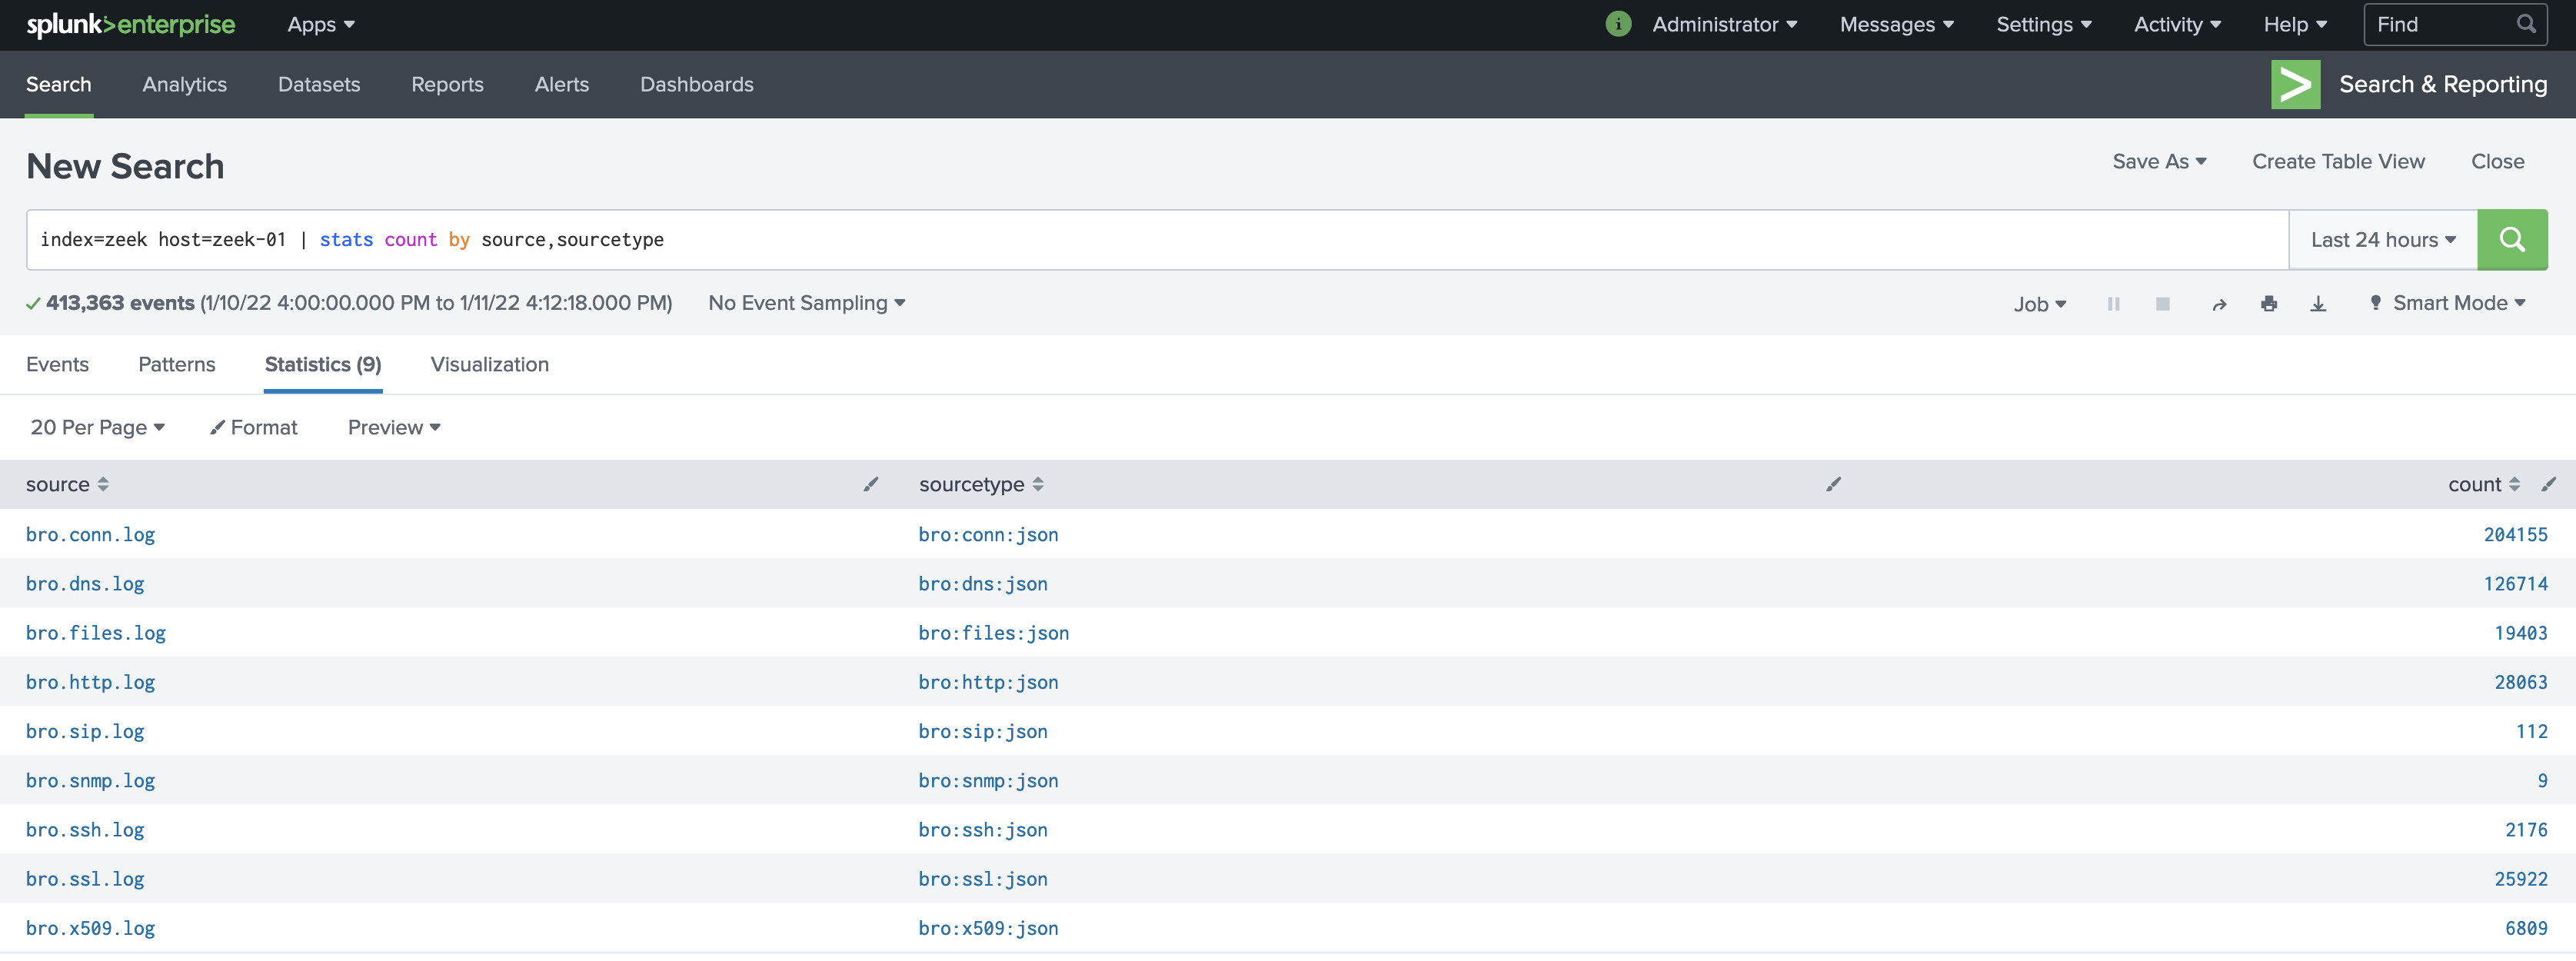 Image of validating source and sourcetype in Splunk